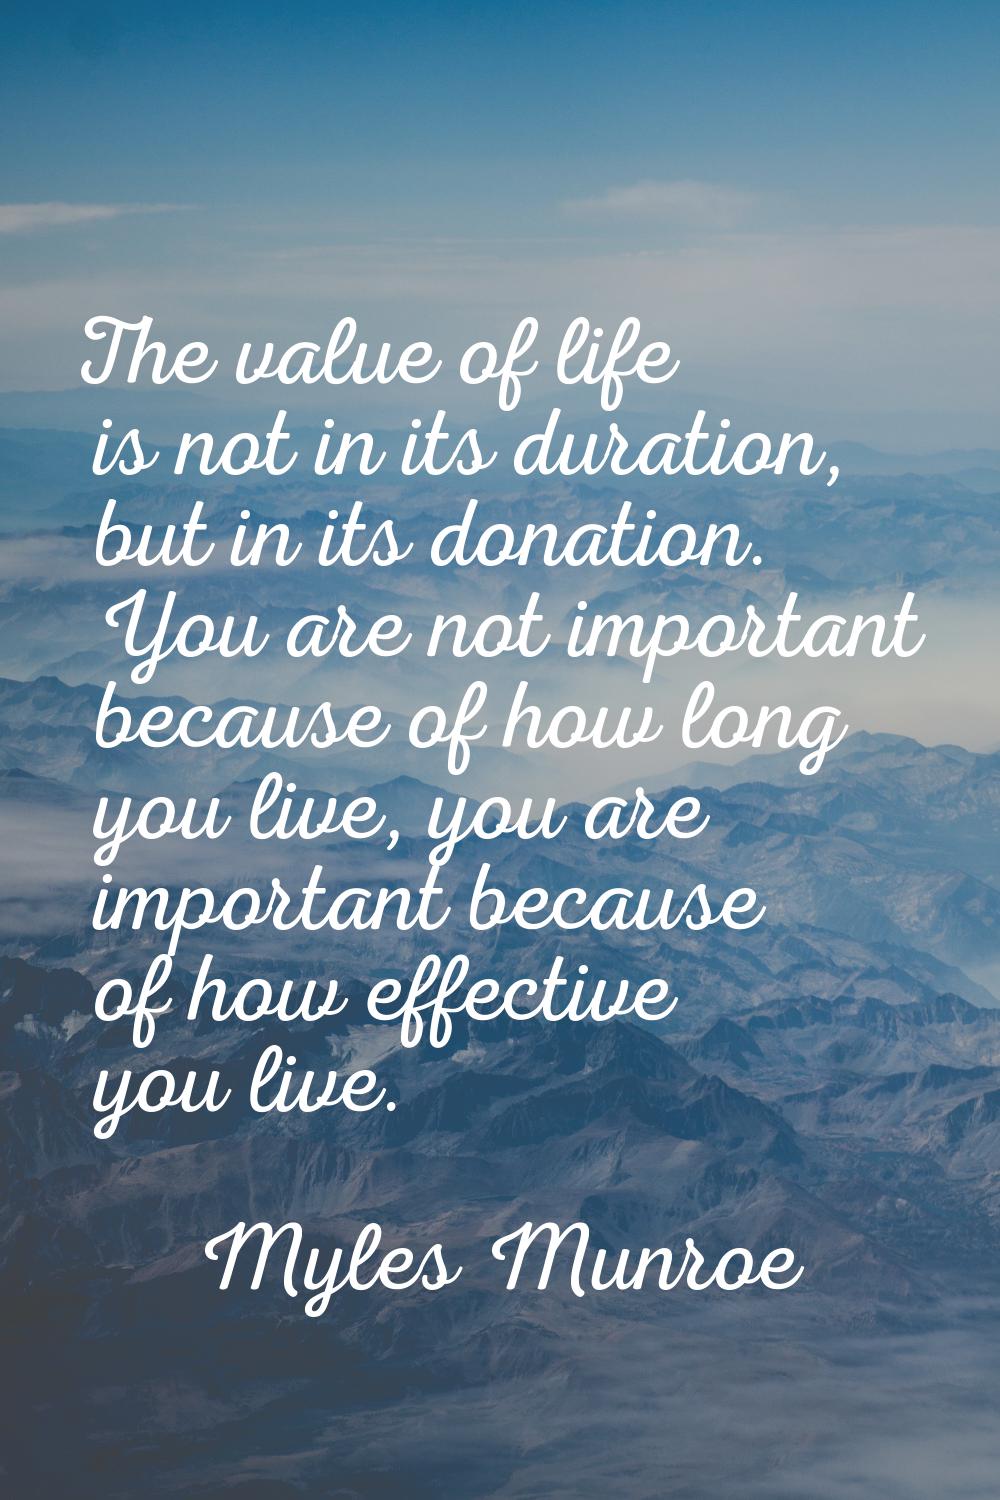 The value of life is not in its duration, but in its donation. You are not important because of how